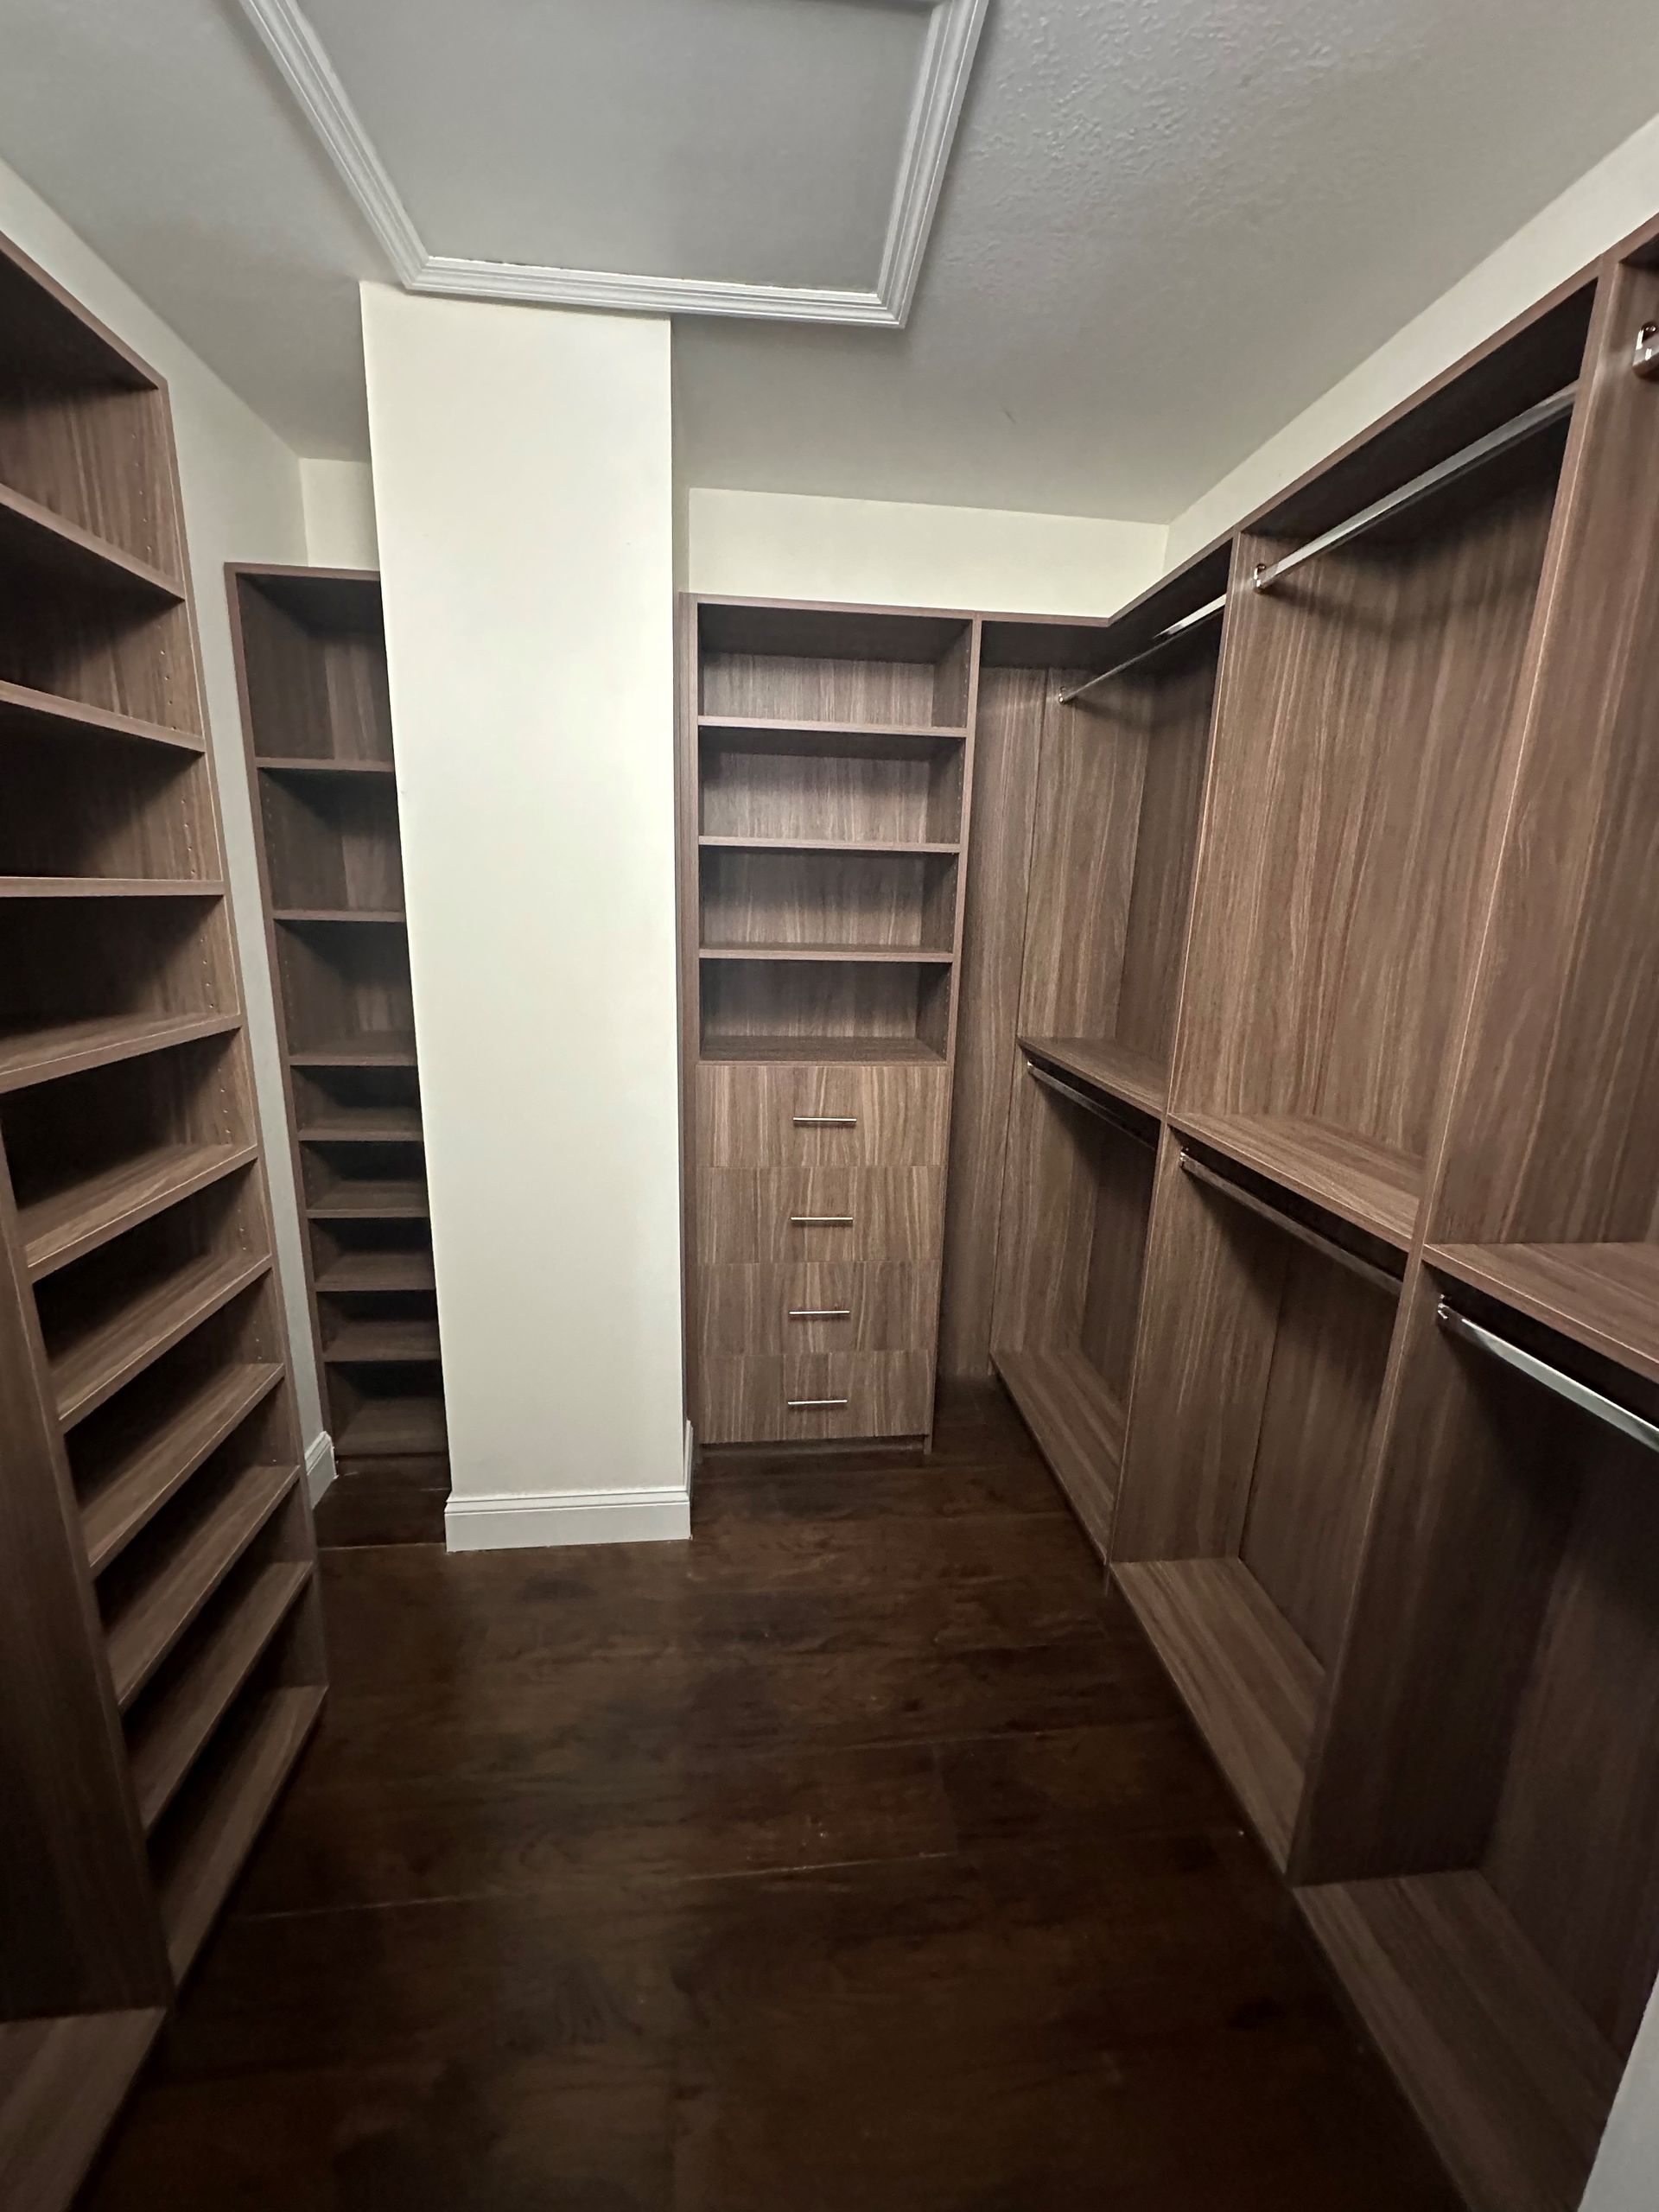 A walk in closet with lots of shelves and drawers